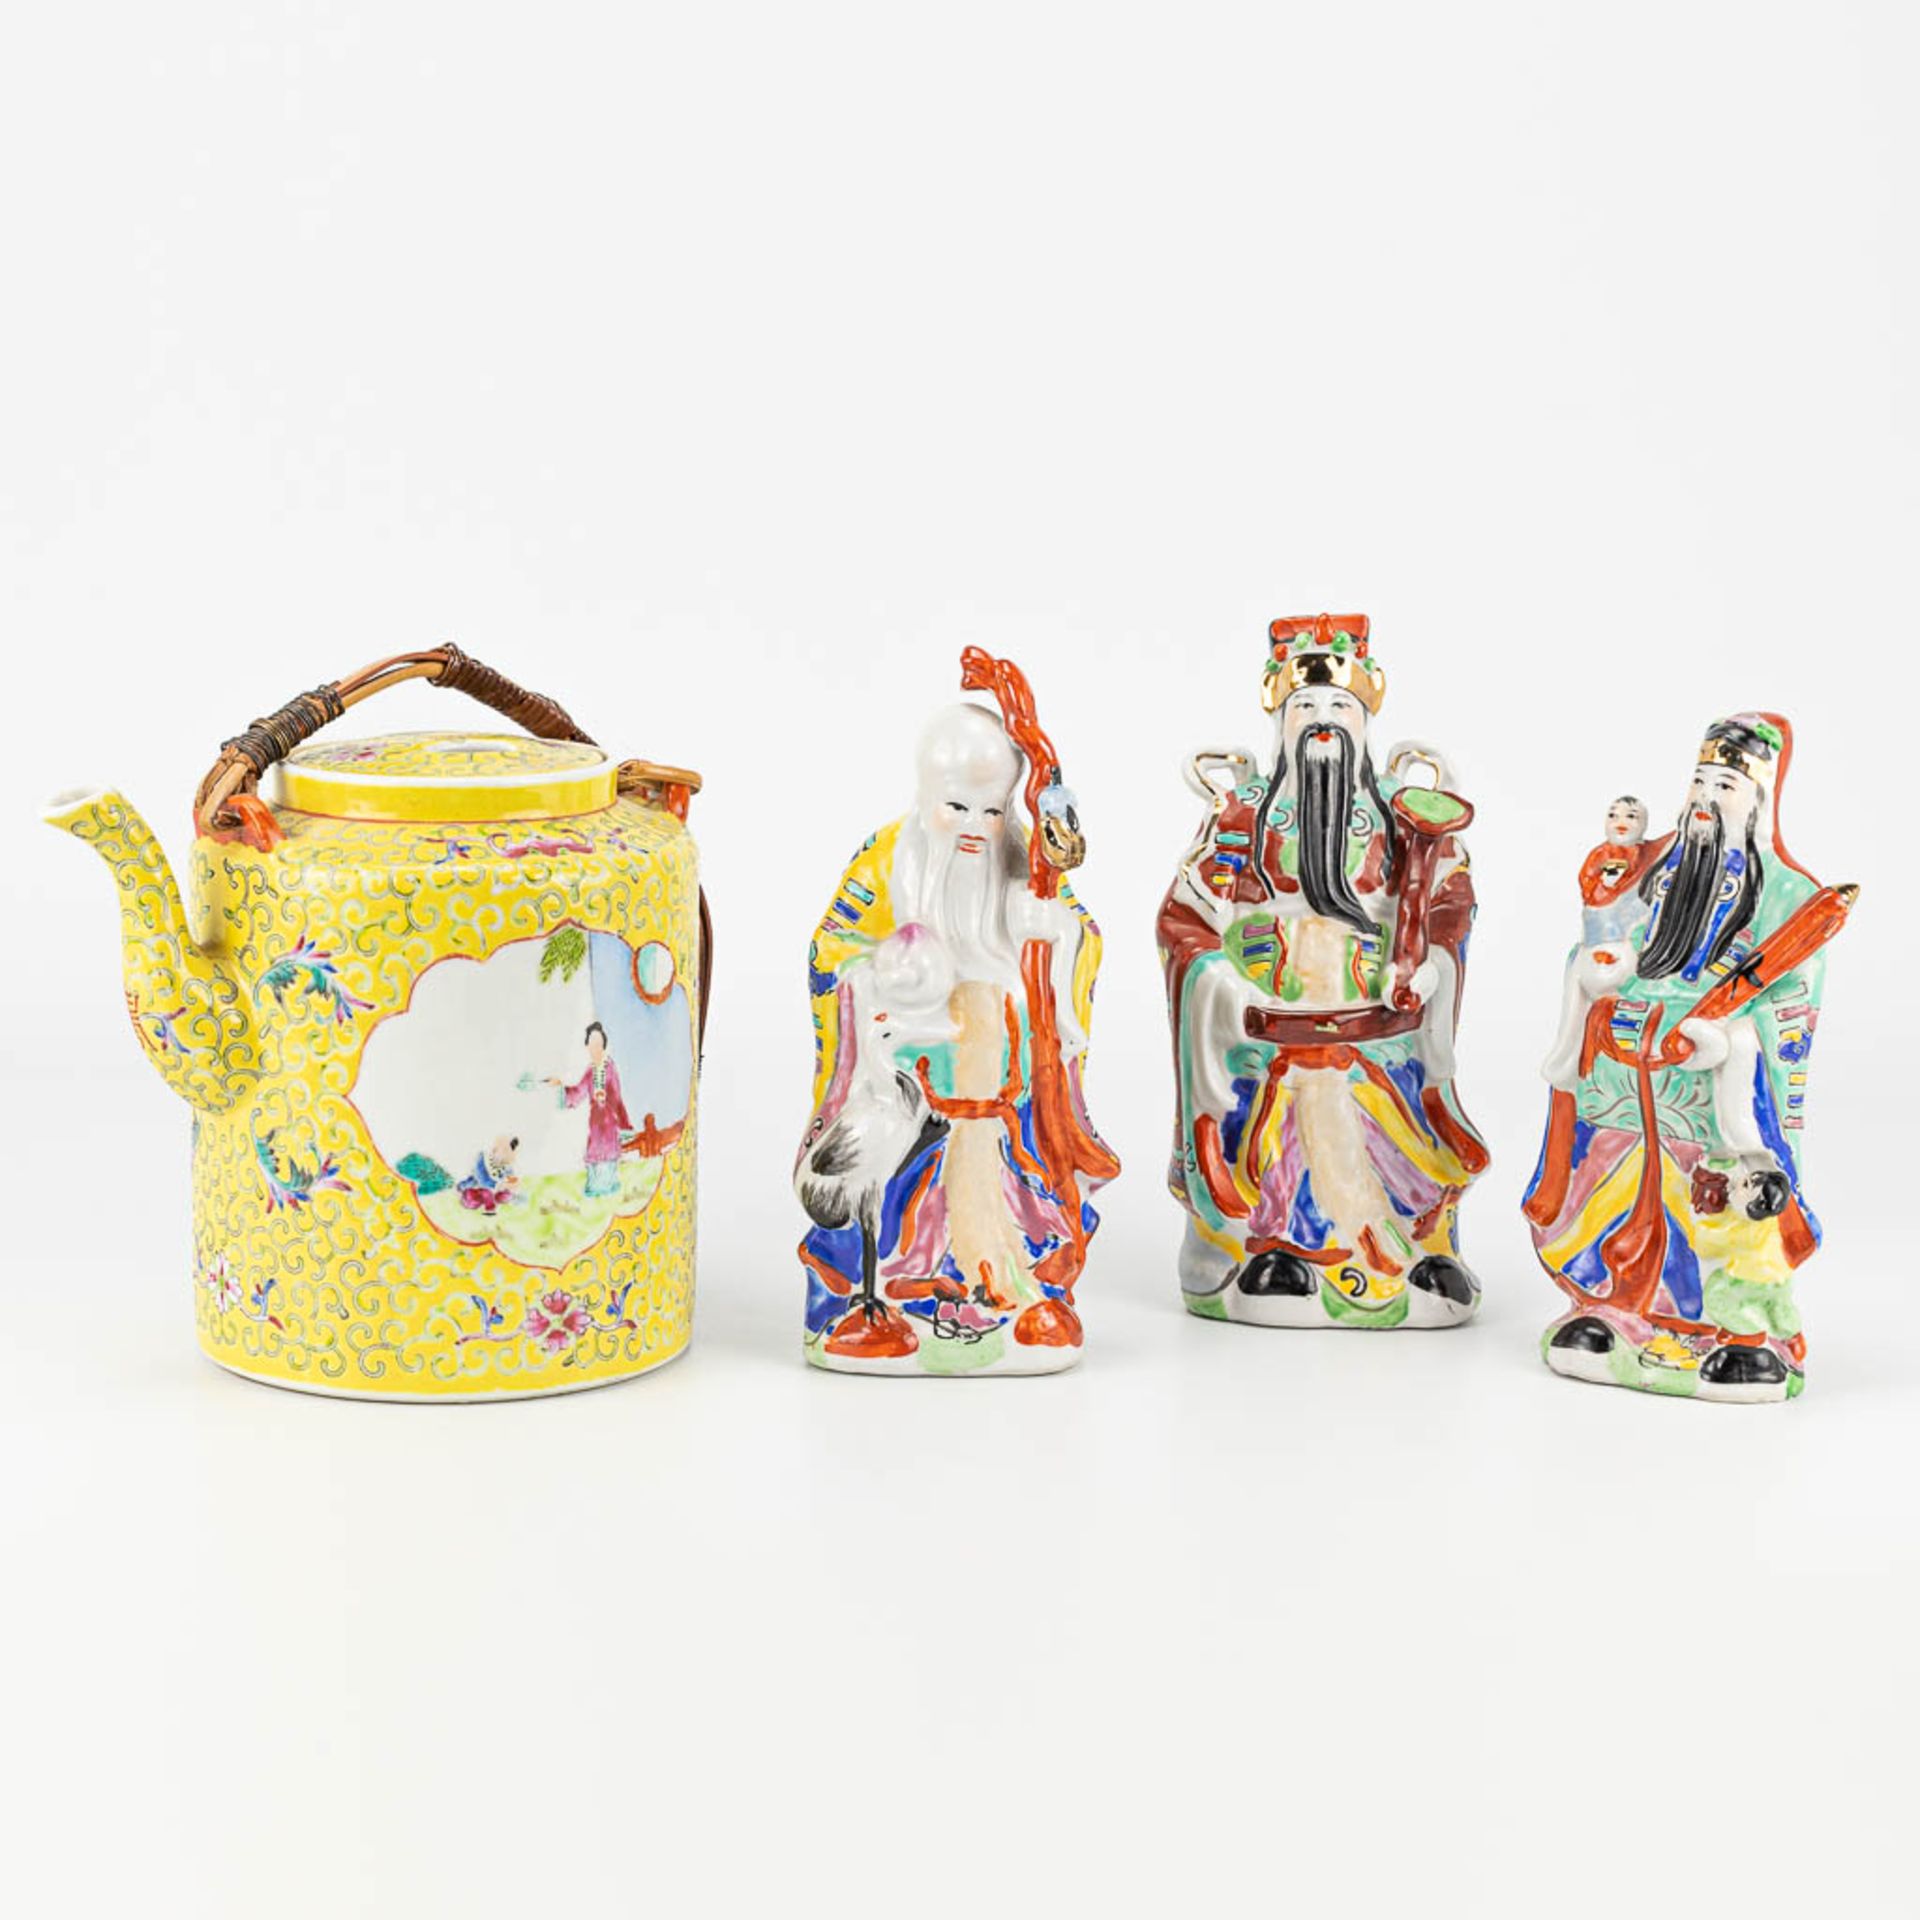 A collection of items made of Chinese porcelain, a teapot, and 3 wise men